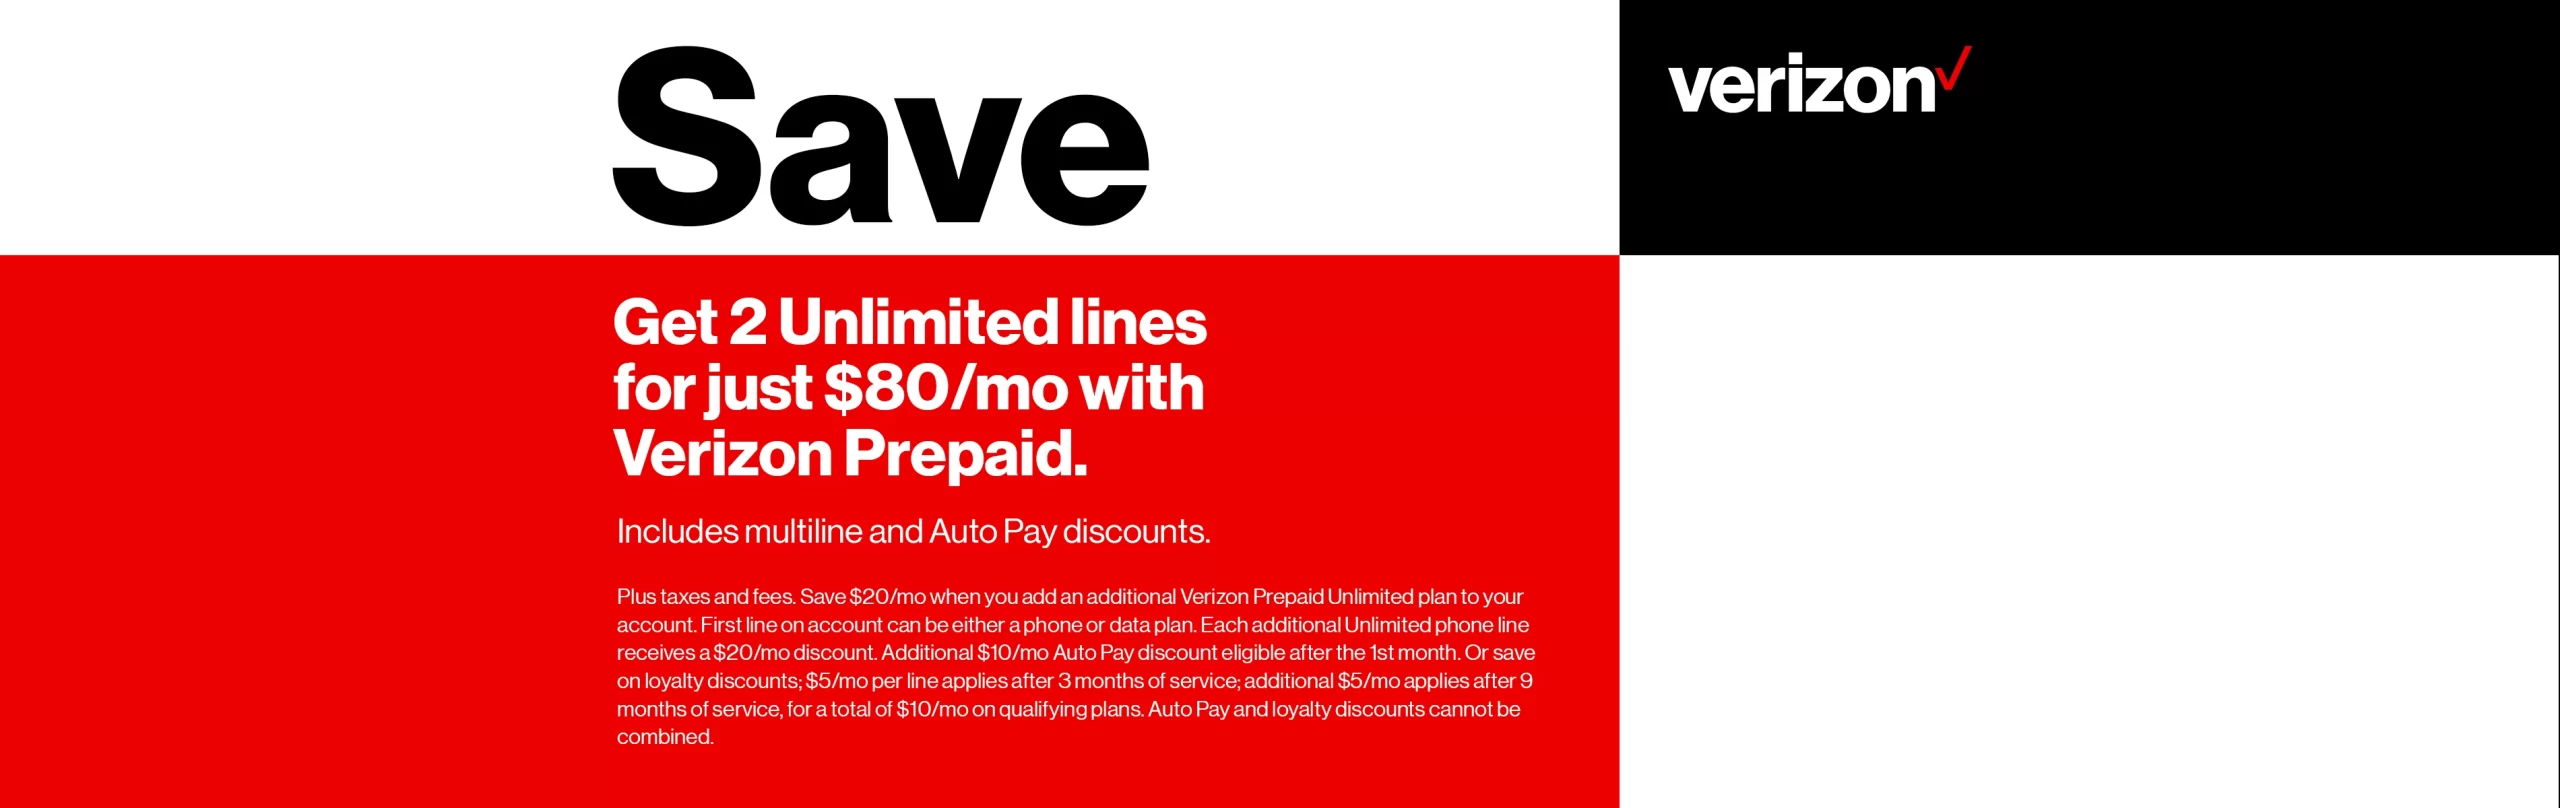 Prepaid Get 2 Unlimited lines for $80 per month.